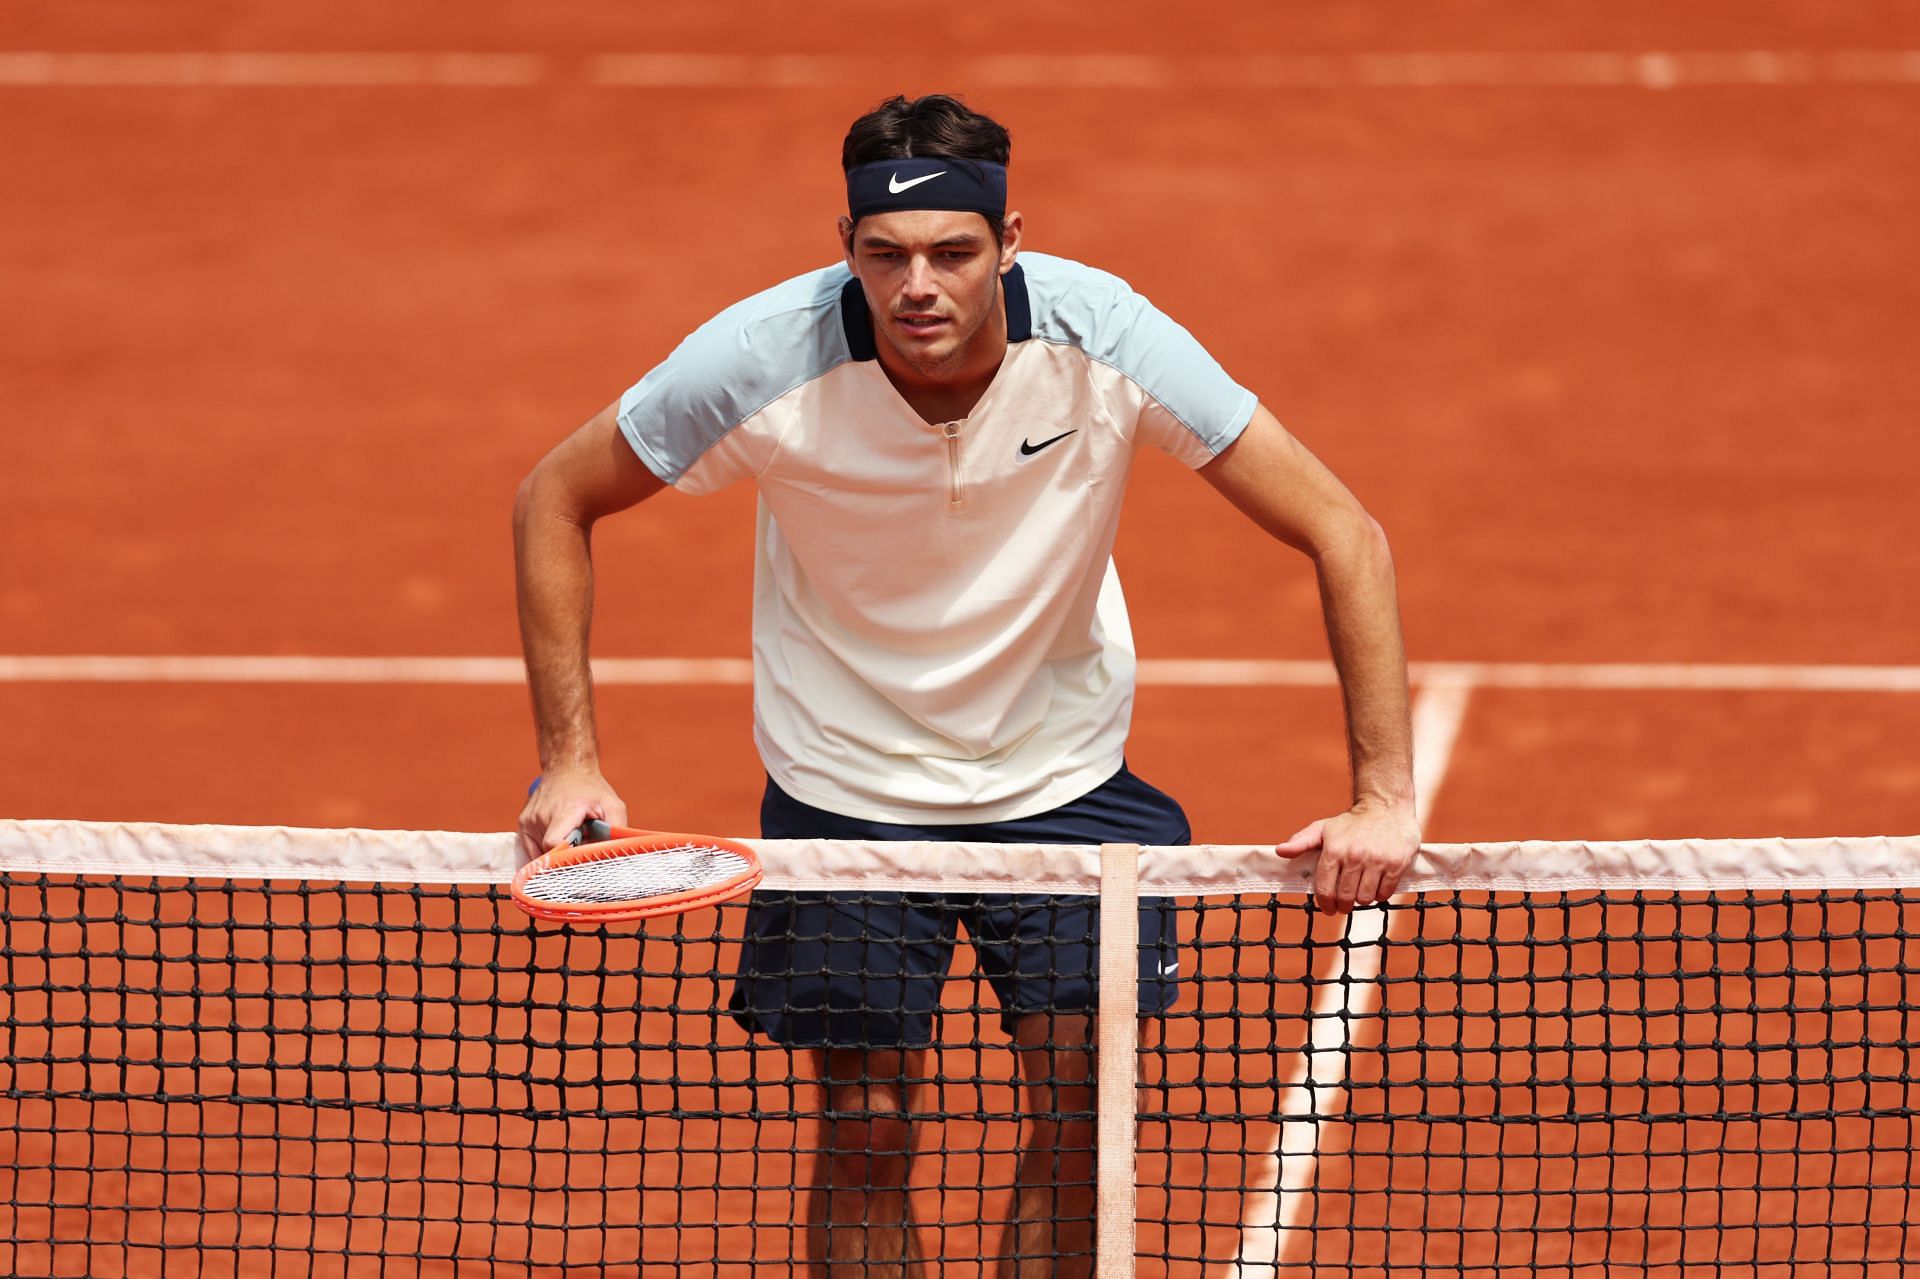 Taylor Fritz at the 2022 French Open - Day Four